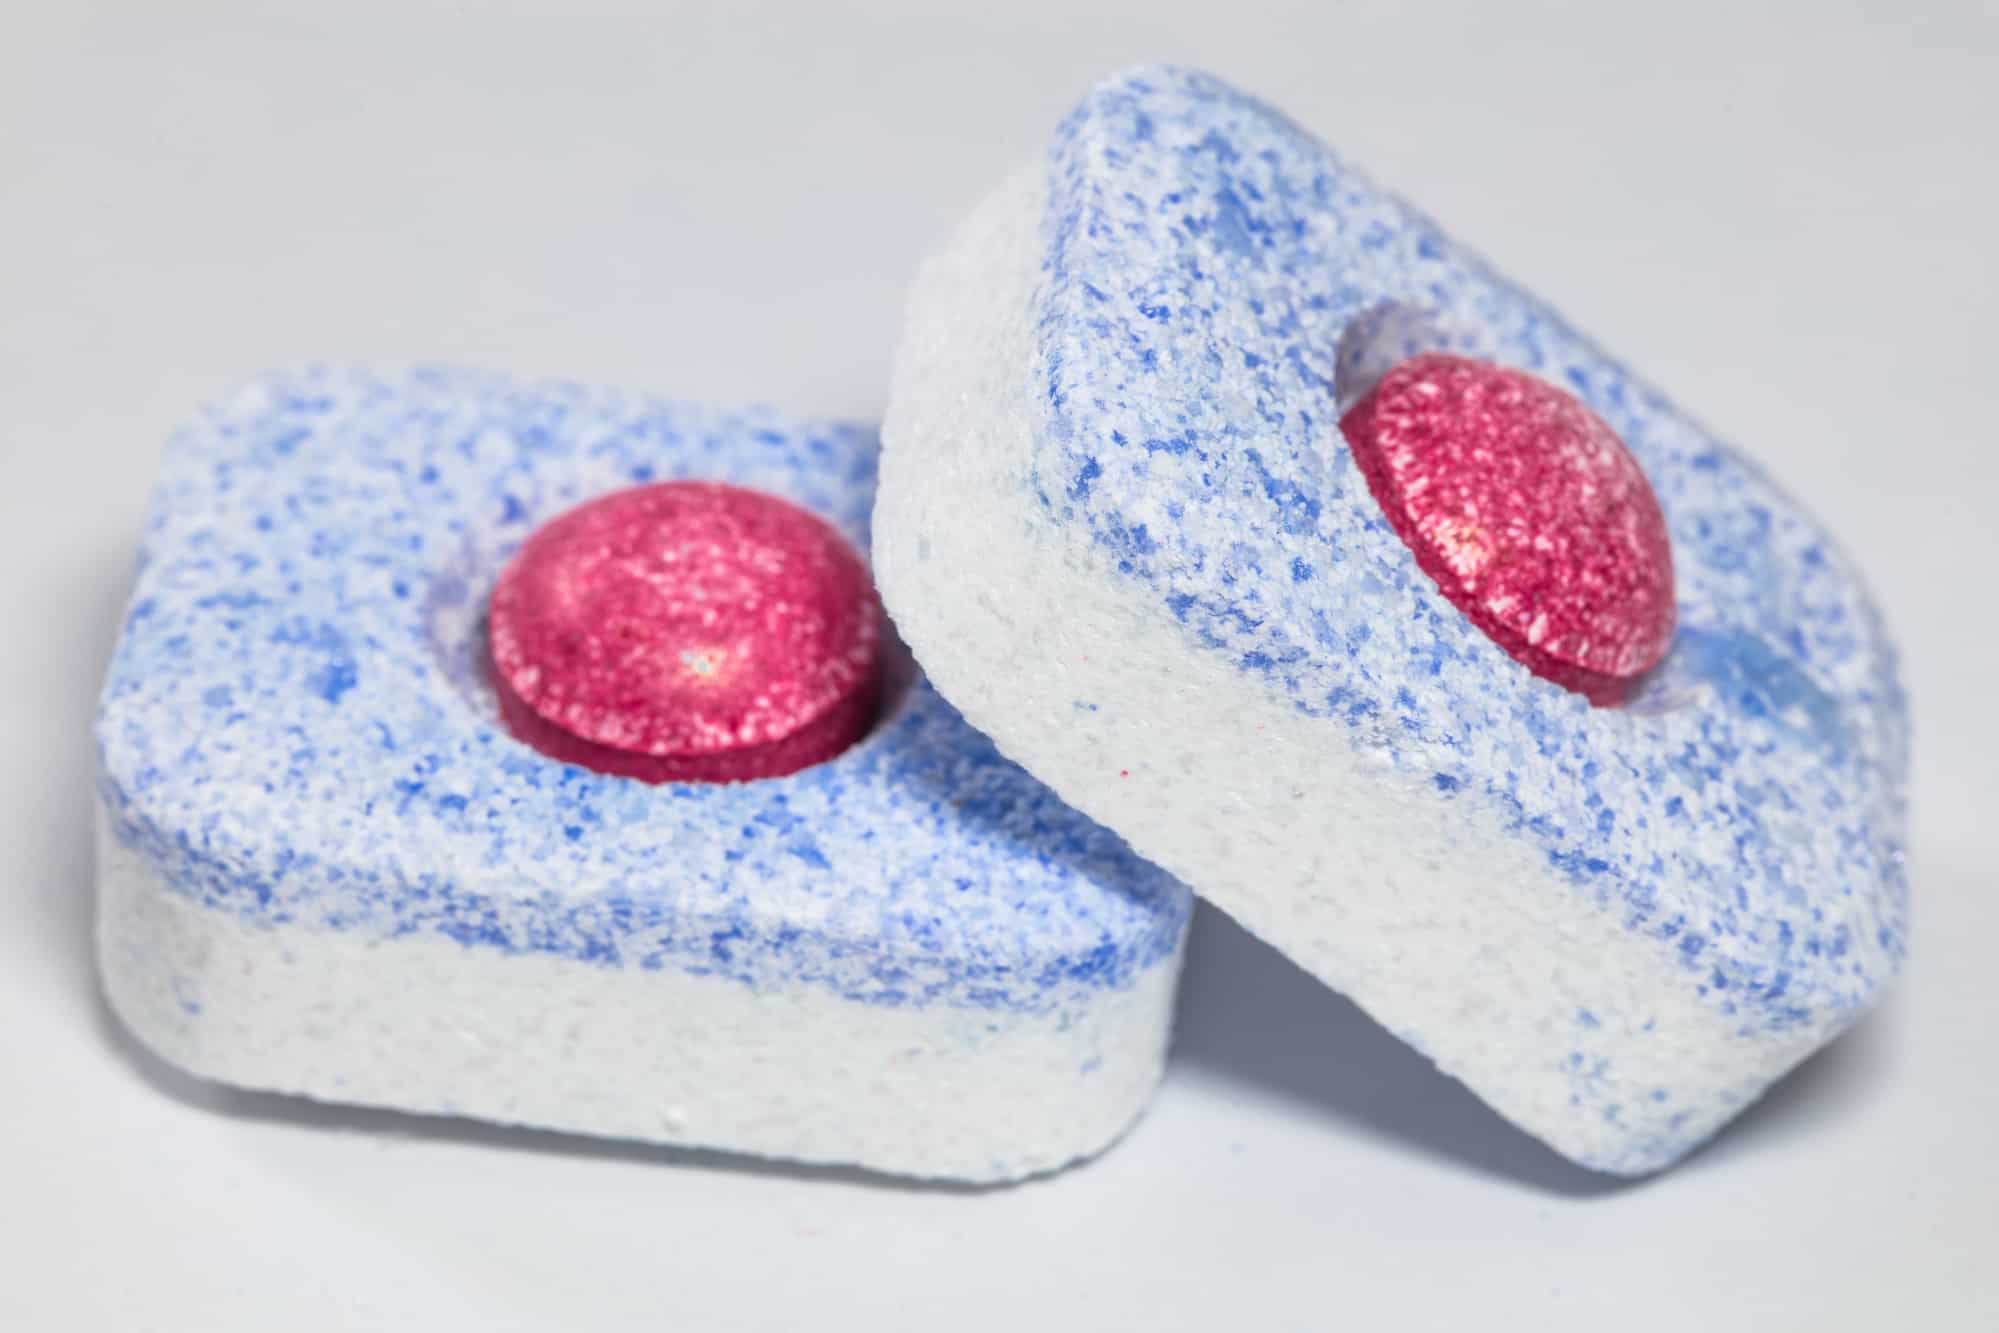 two dishwasher tablets